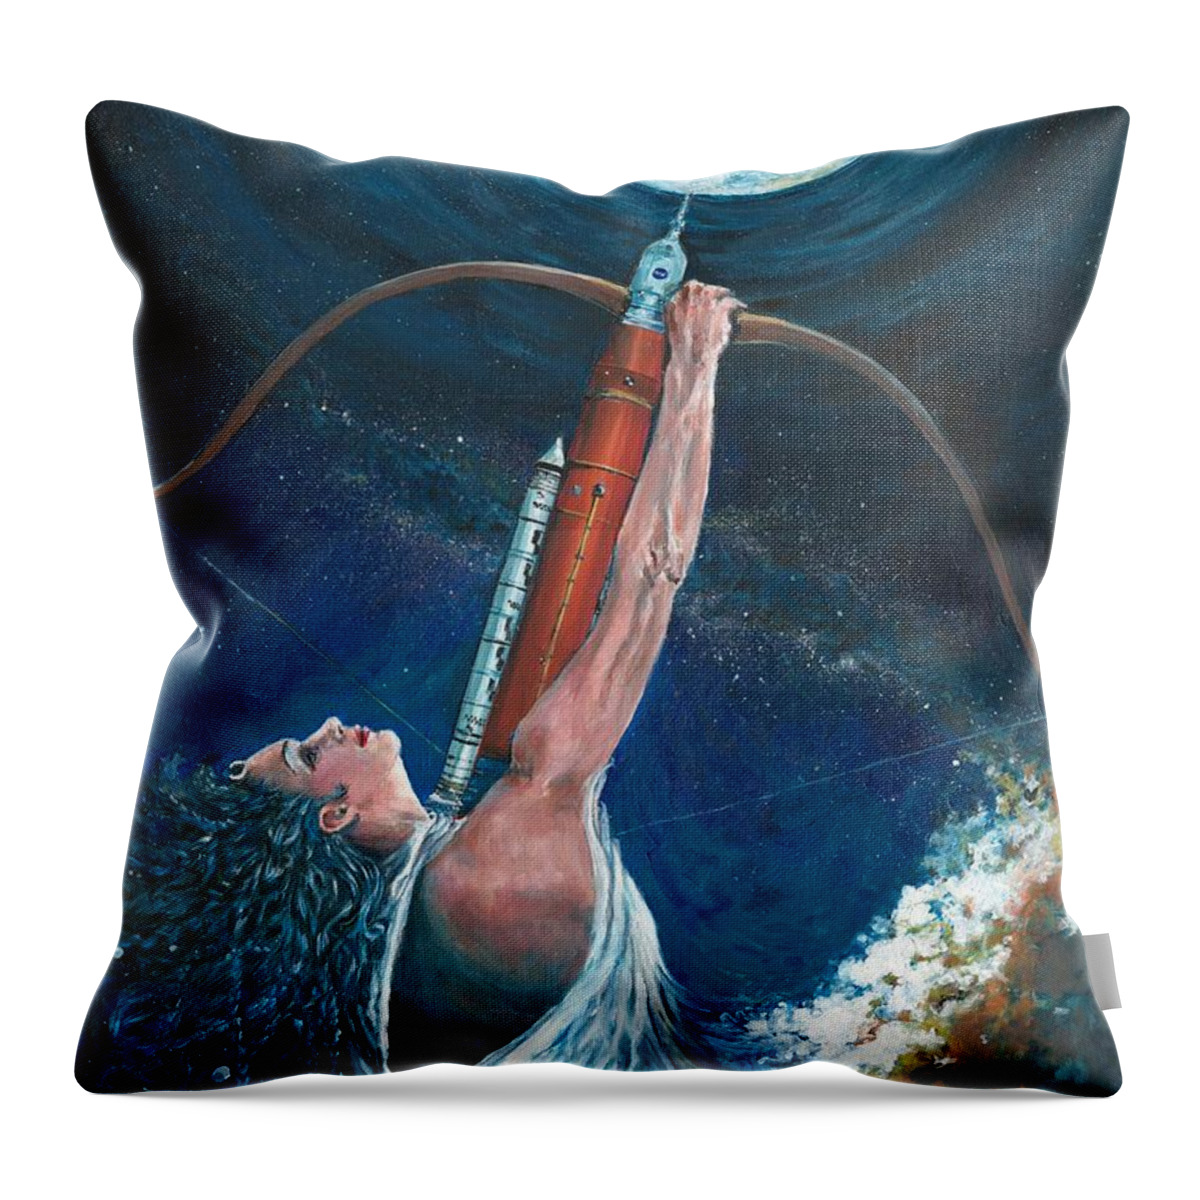 Artemis Throw Pillow featuring the painting Artemis by Merana Cadorette